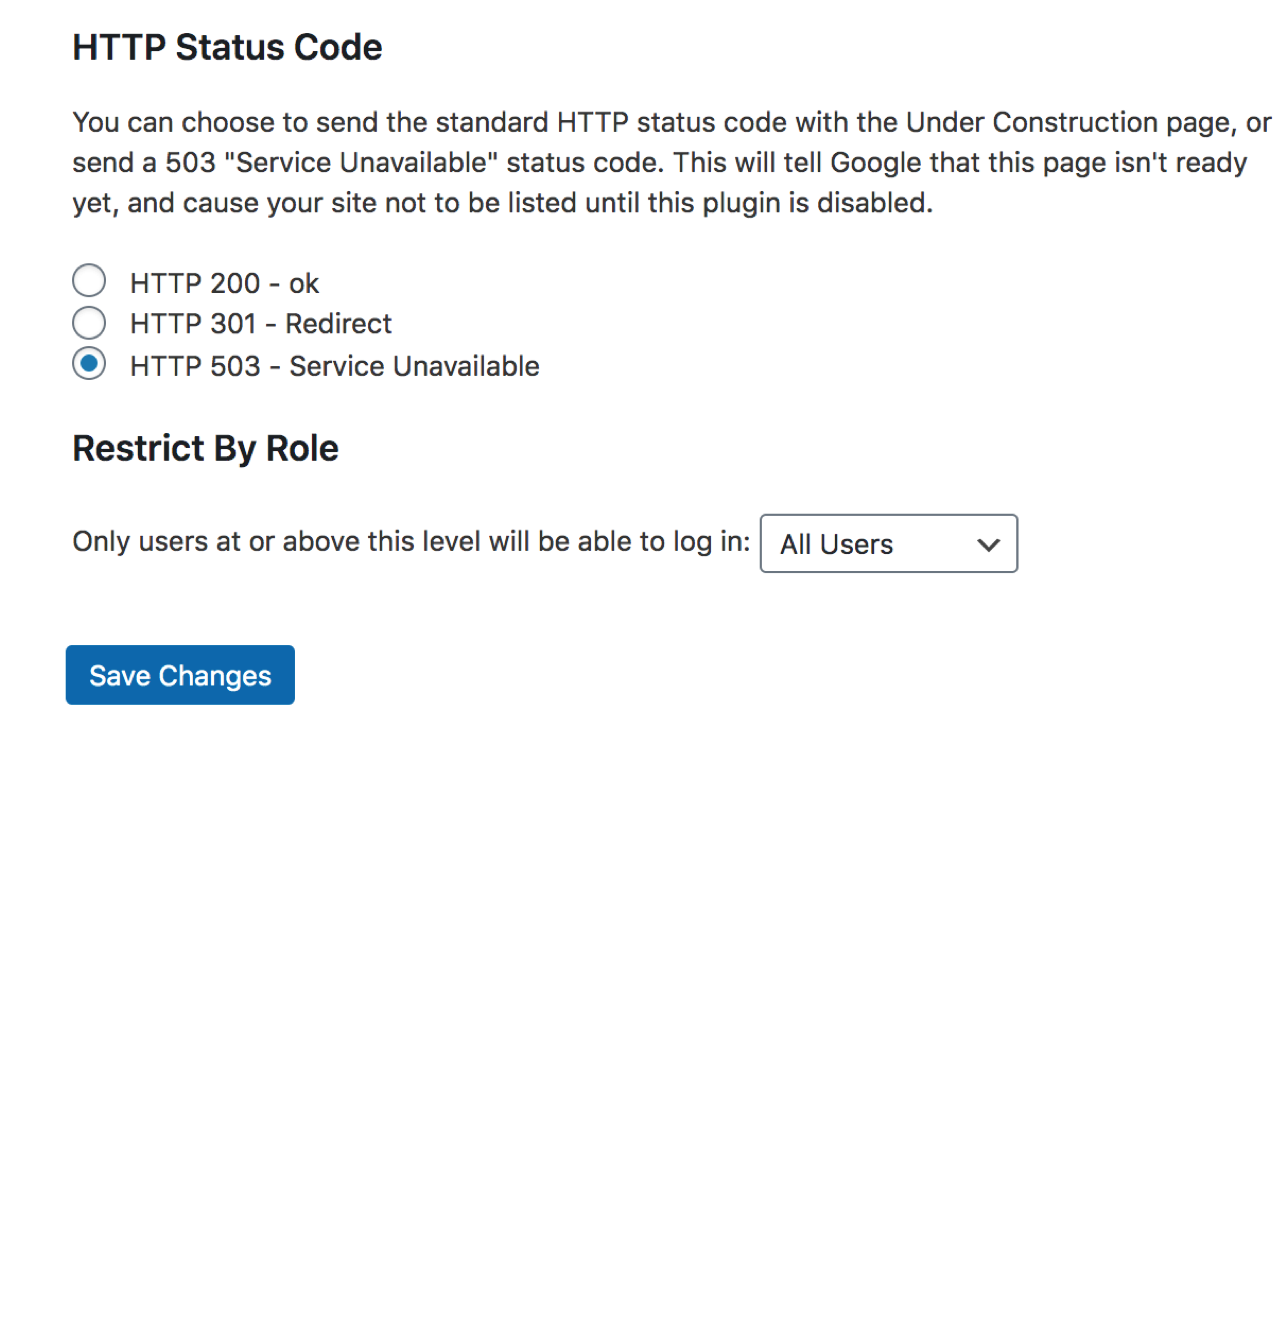 HTTP Status Code and User Roles